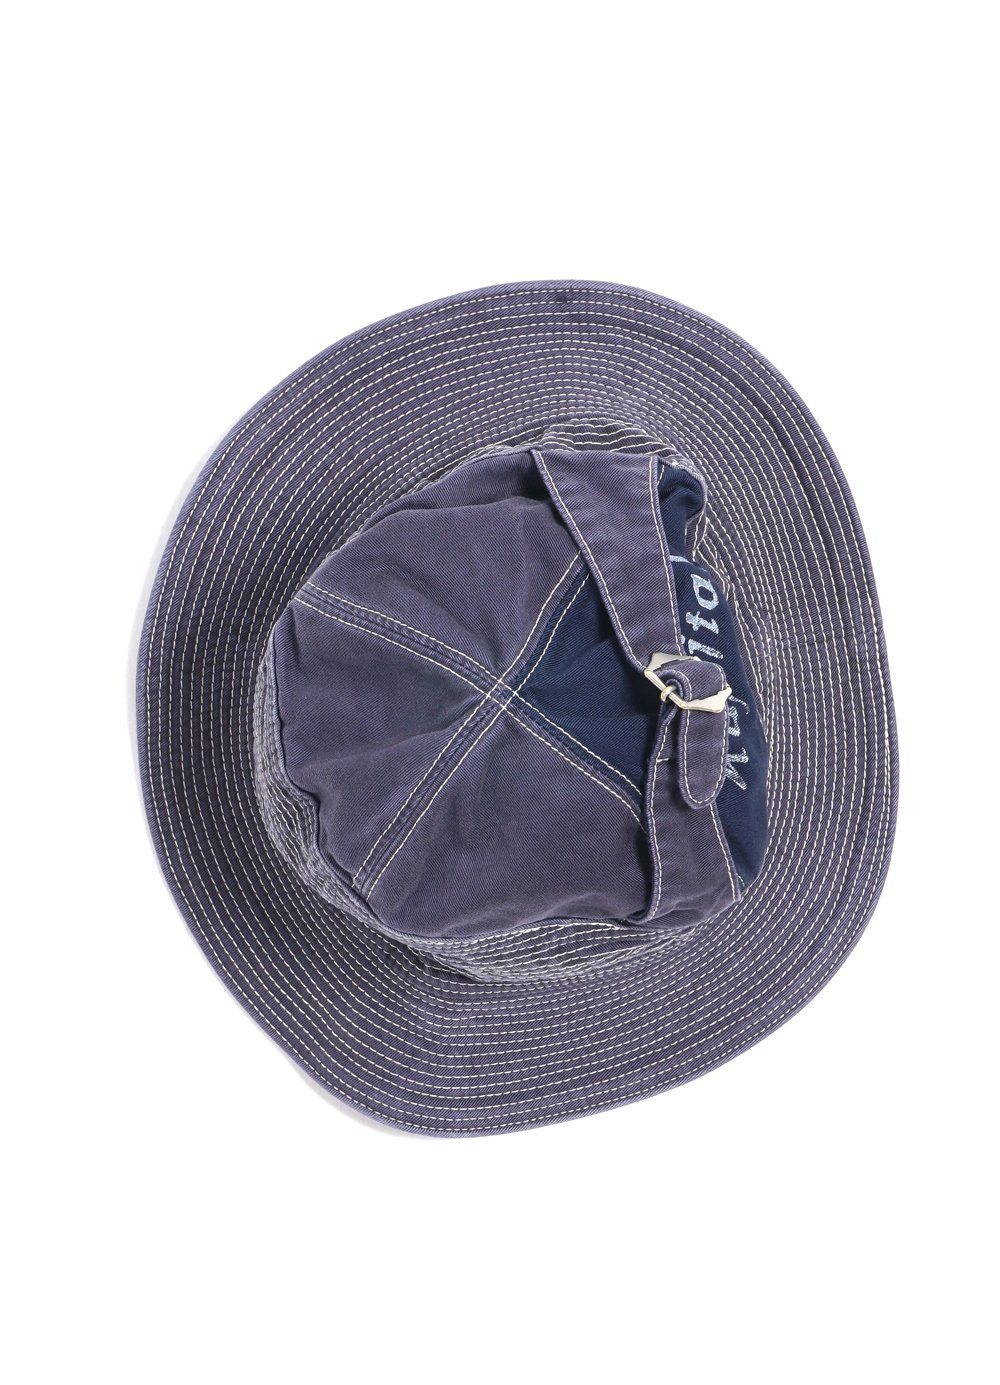 SOLD OUT - THE OLD MAN AND THE SEA | Chino Hat | Navy - HANSEN Garments